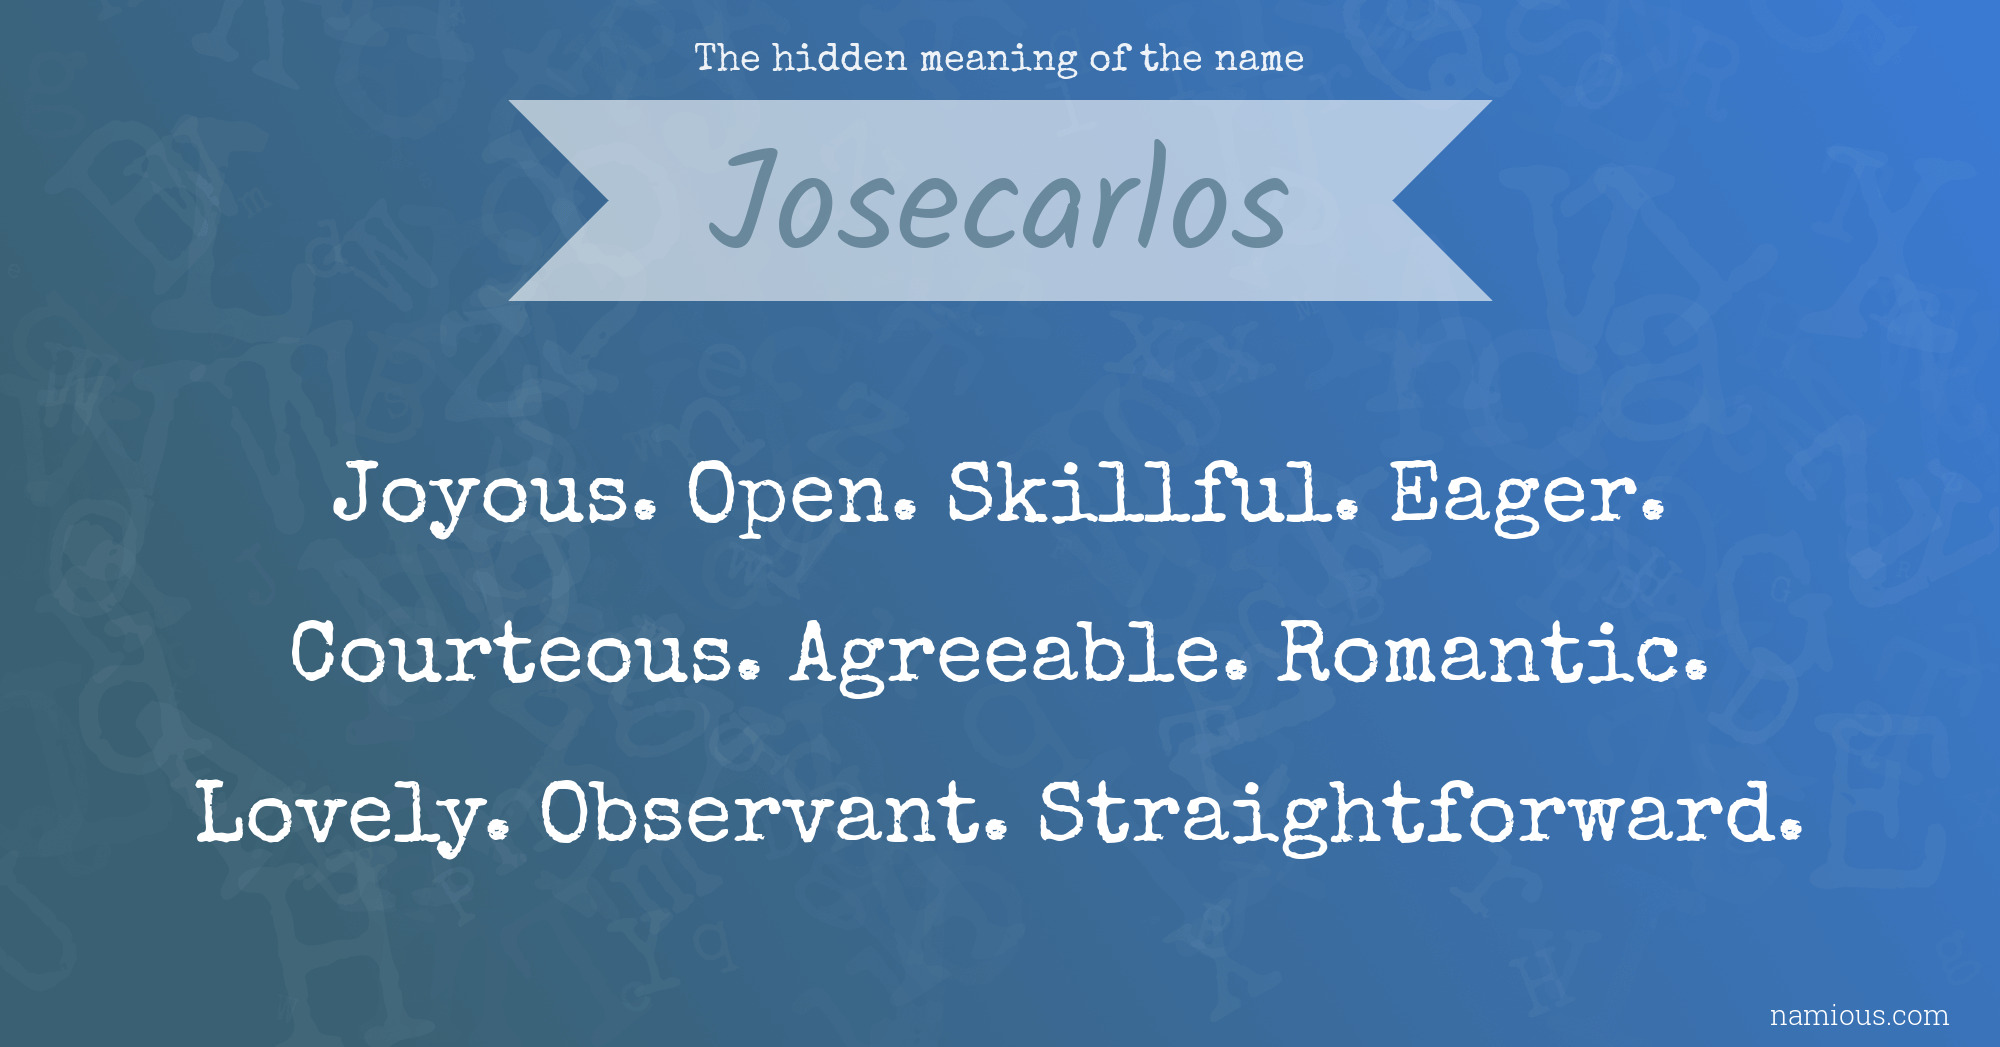 The hidden meaning of the name Josecarlos